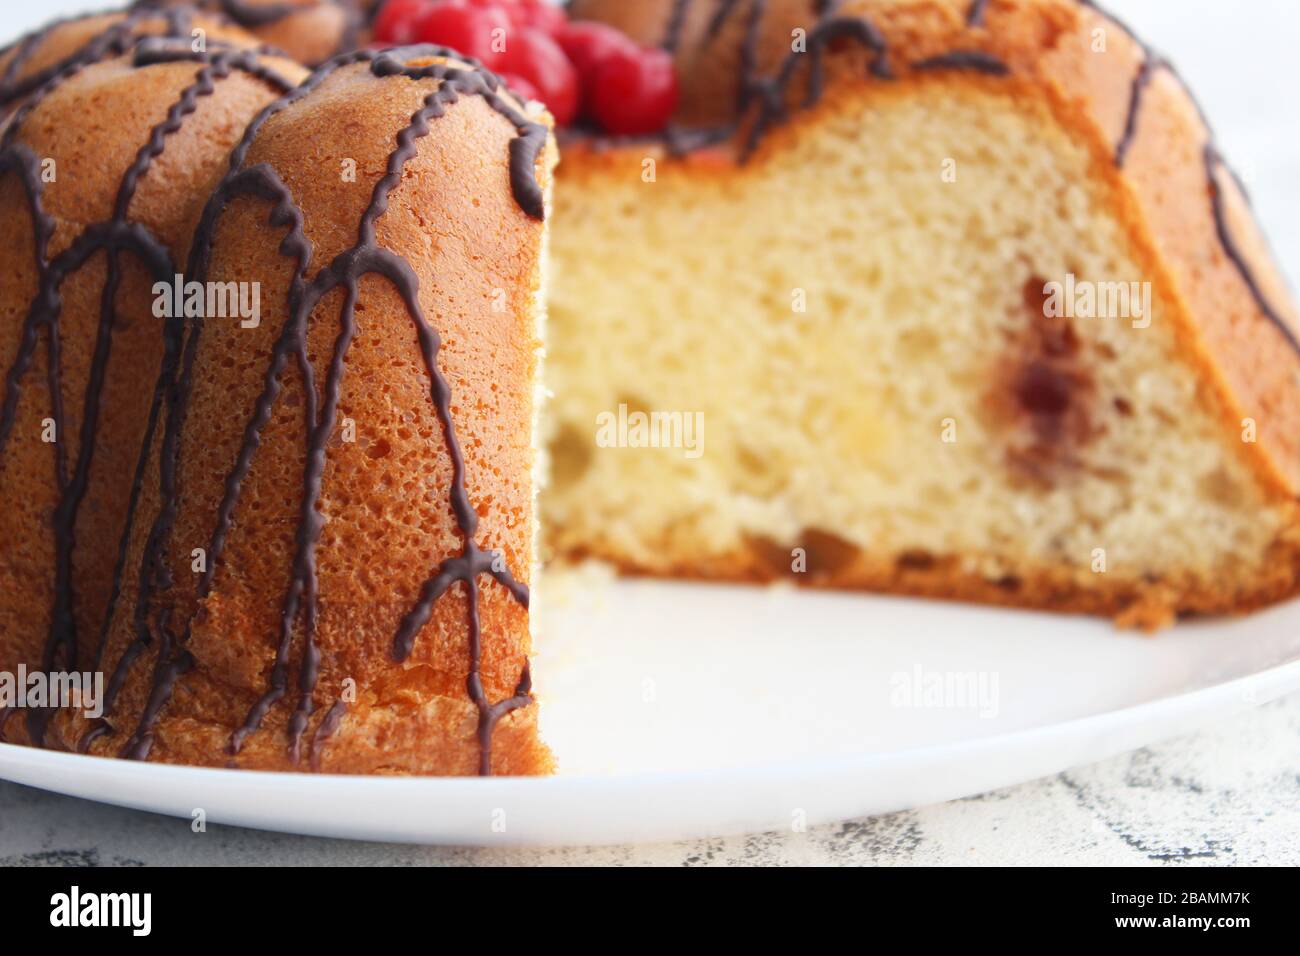 Homemade cake with fresh cherry on dark background, top view, copy space Stock Photo